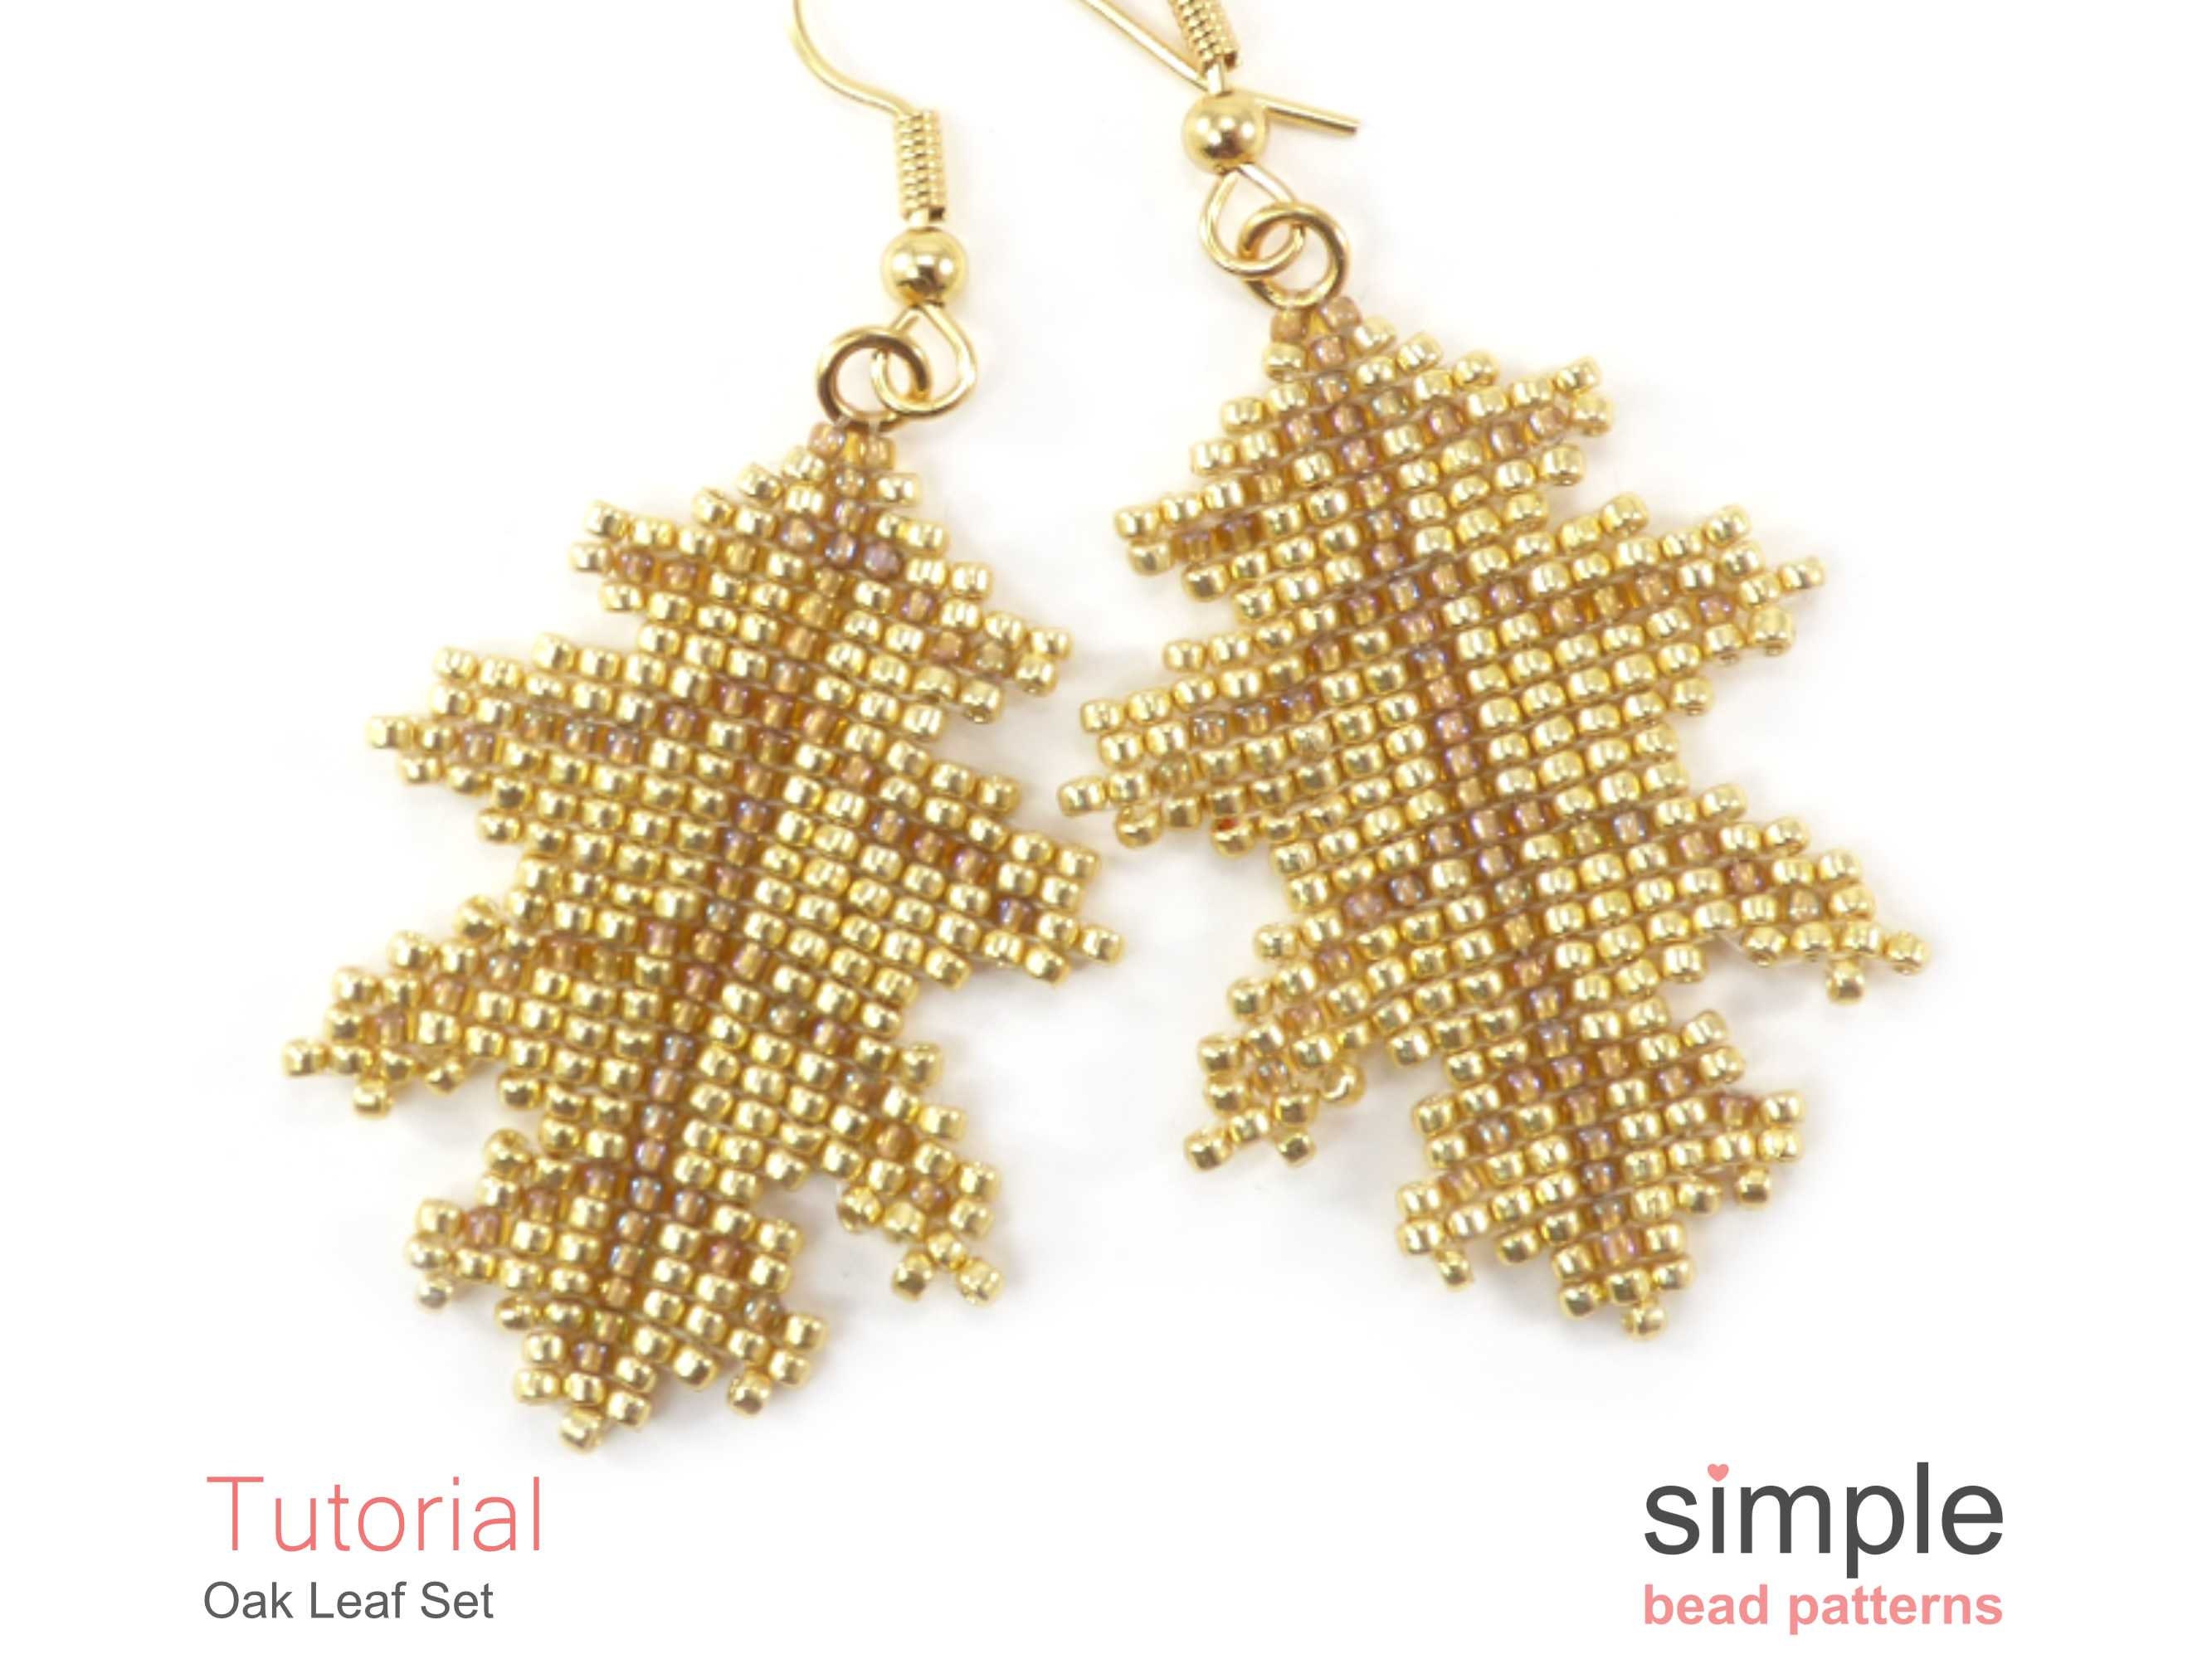 Inspirational Beading: Beaded Leaf Tutorials and Projects